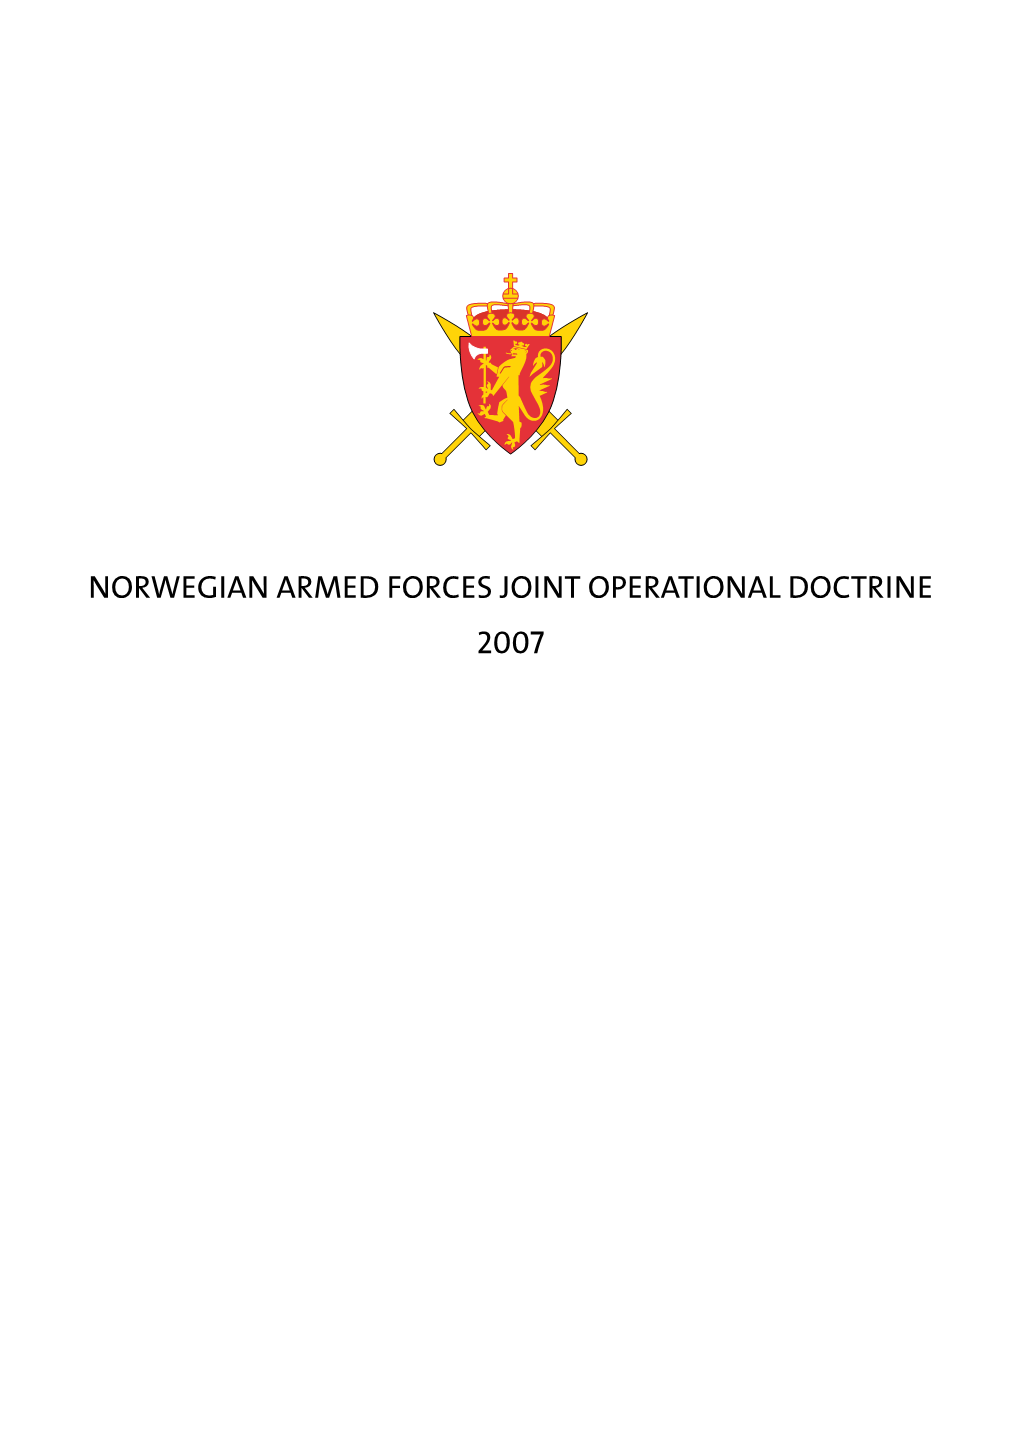 Norwegian Armed Forces Joint Operational Doctrine 2007